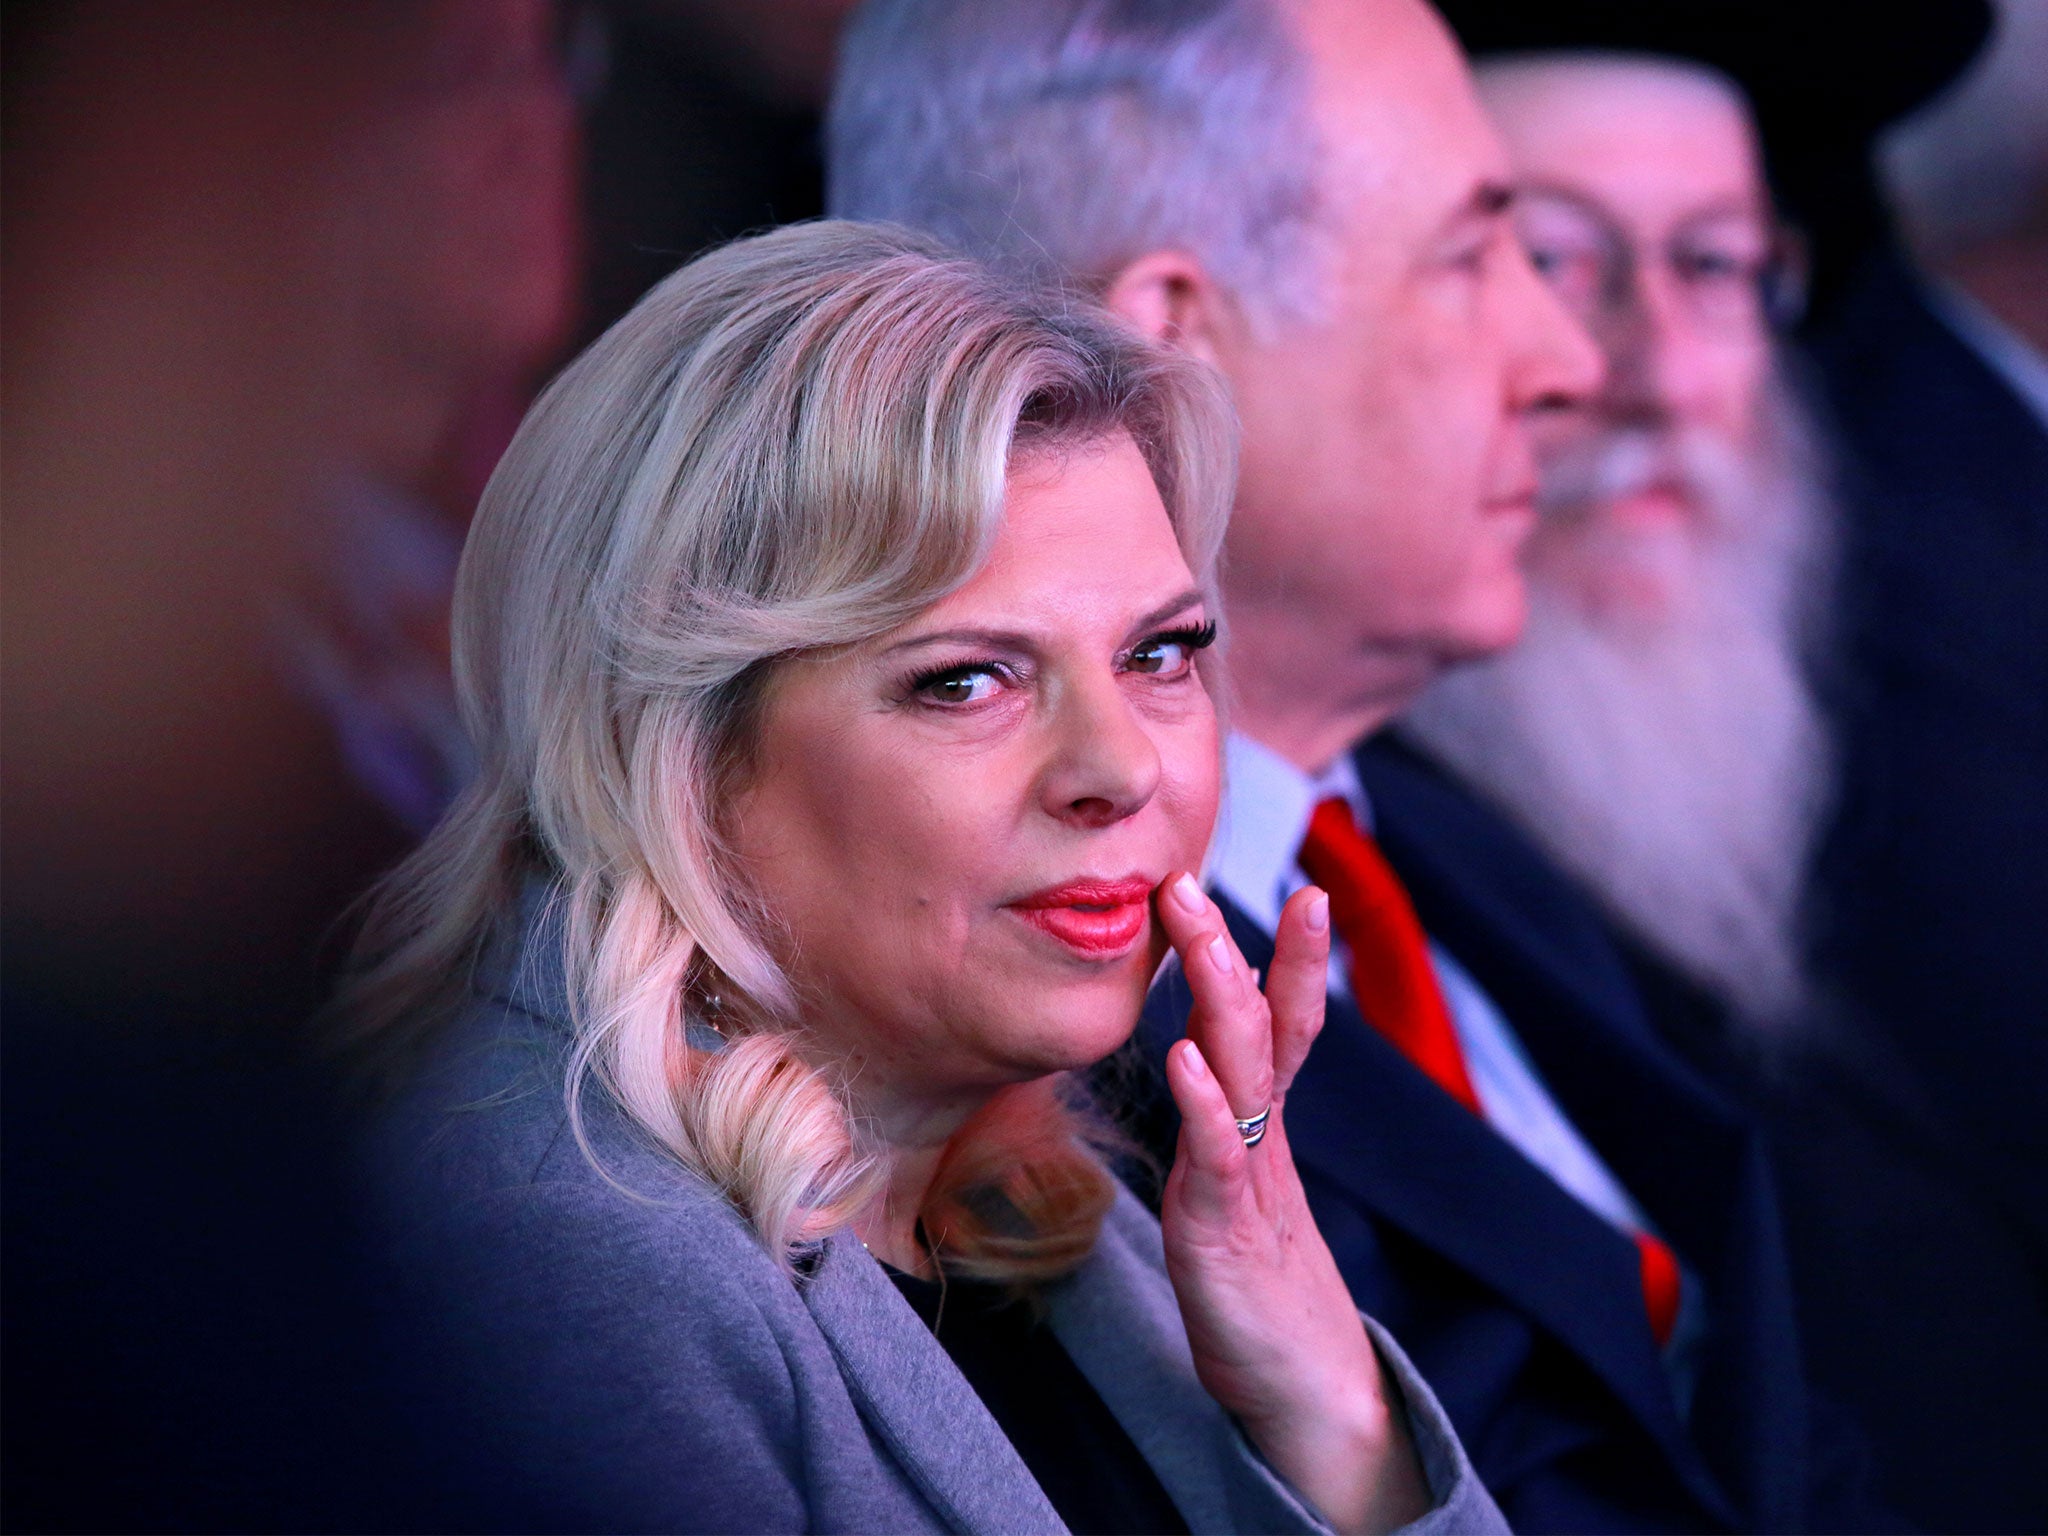 Sara Netanyahu: Israeli PM&apos;s wife charged over alleged misuse of state funds